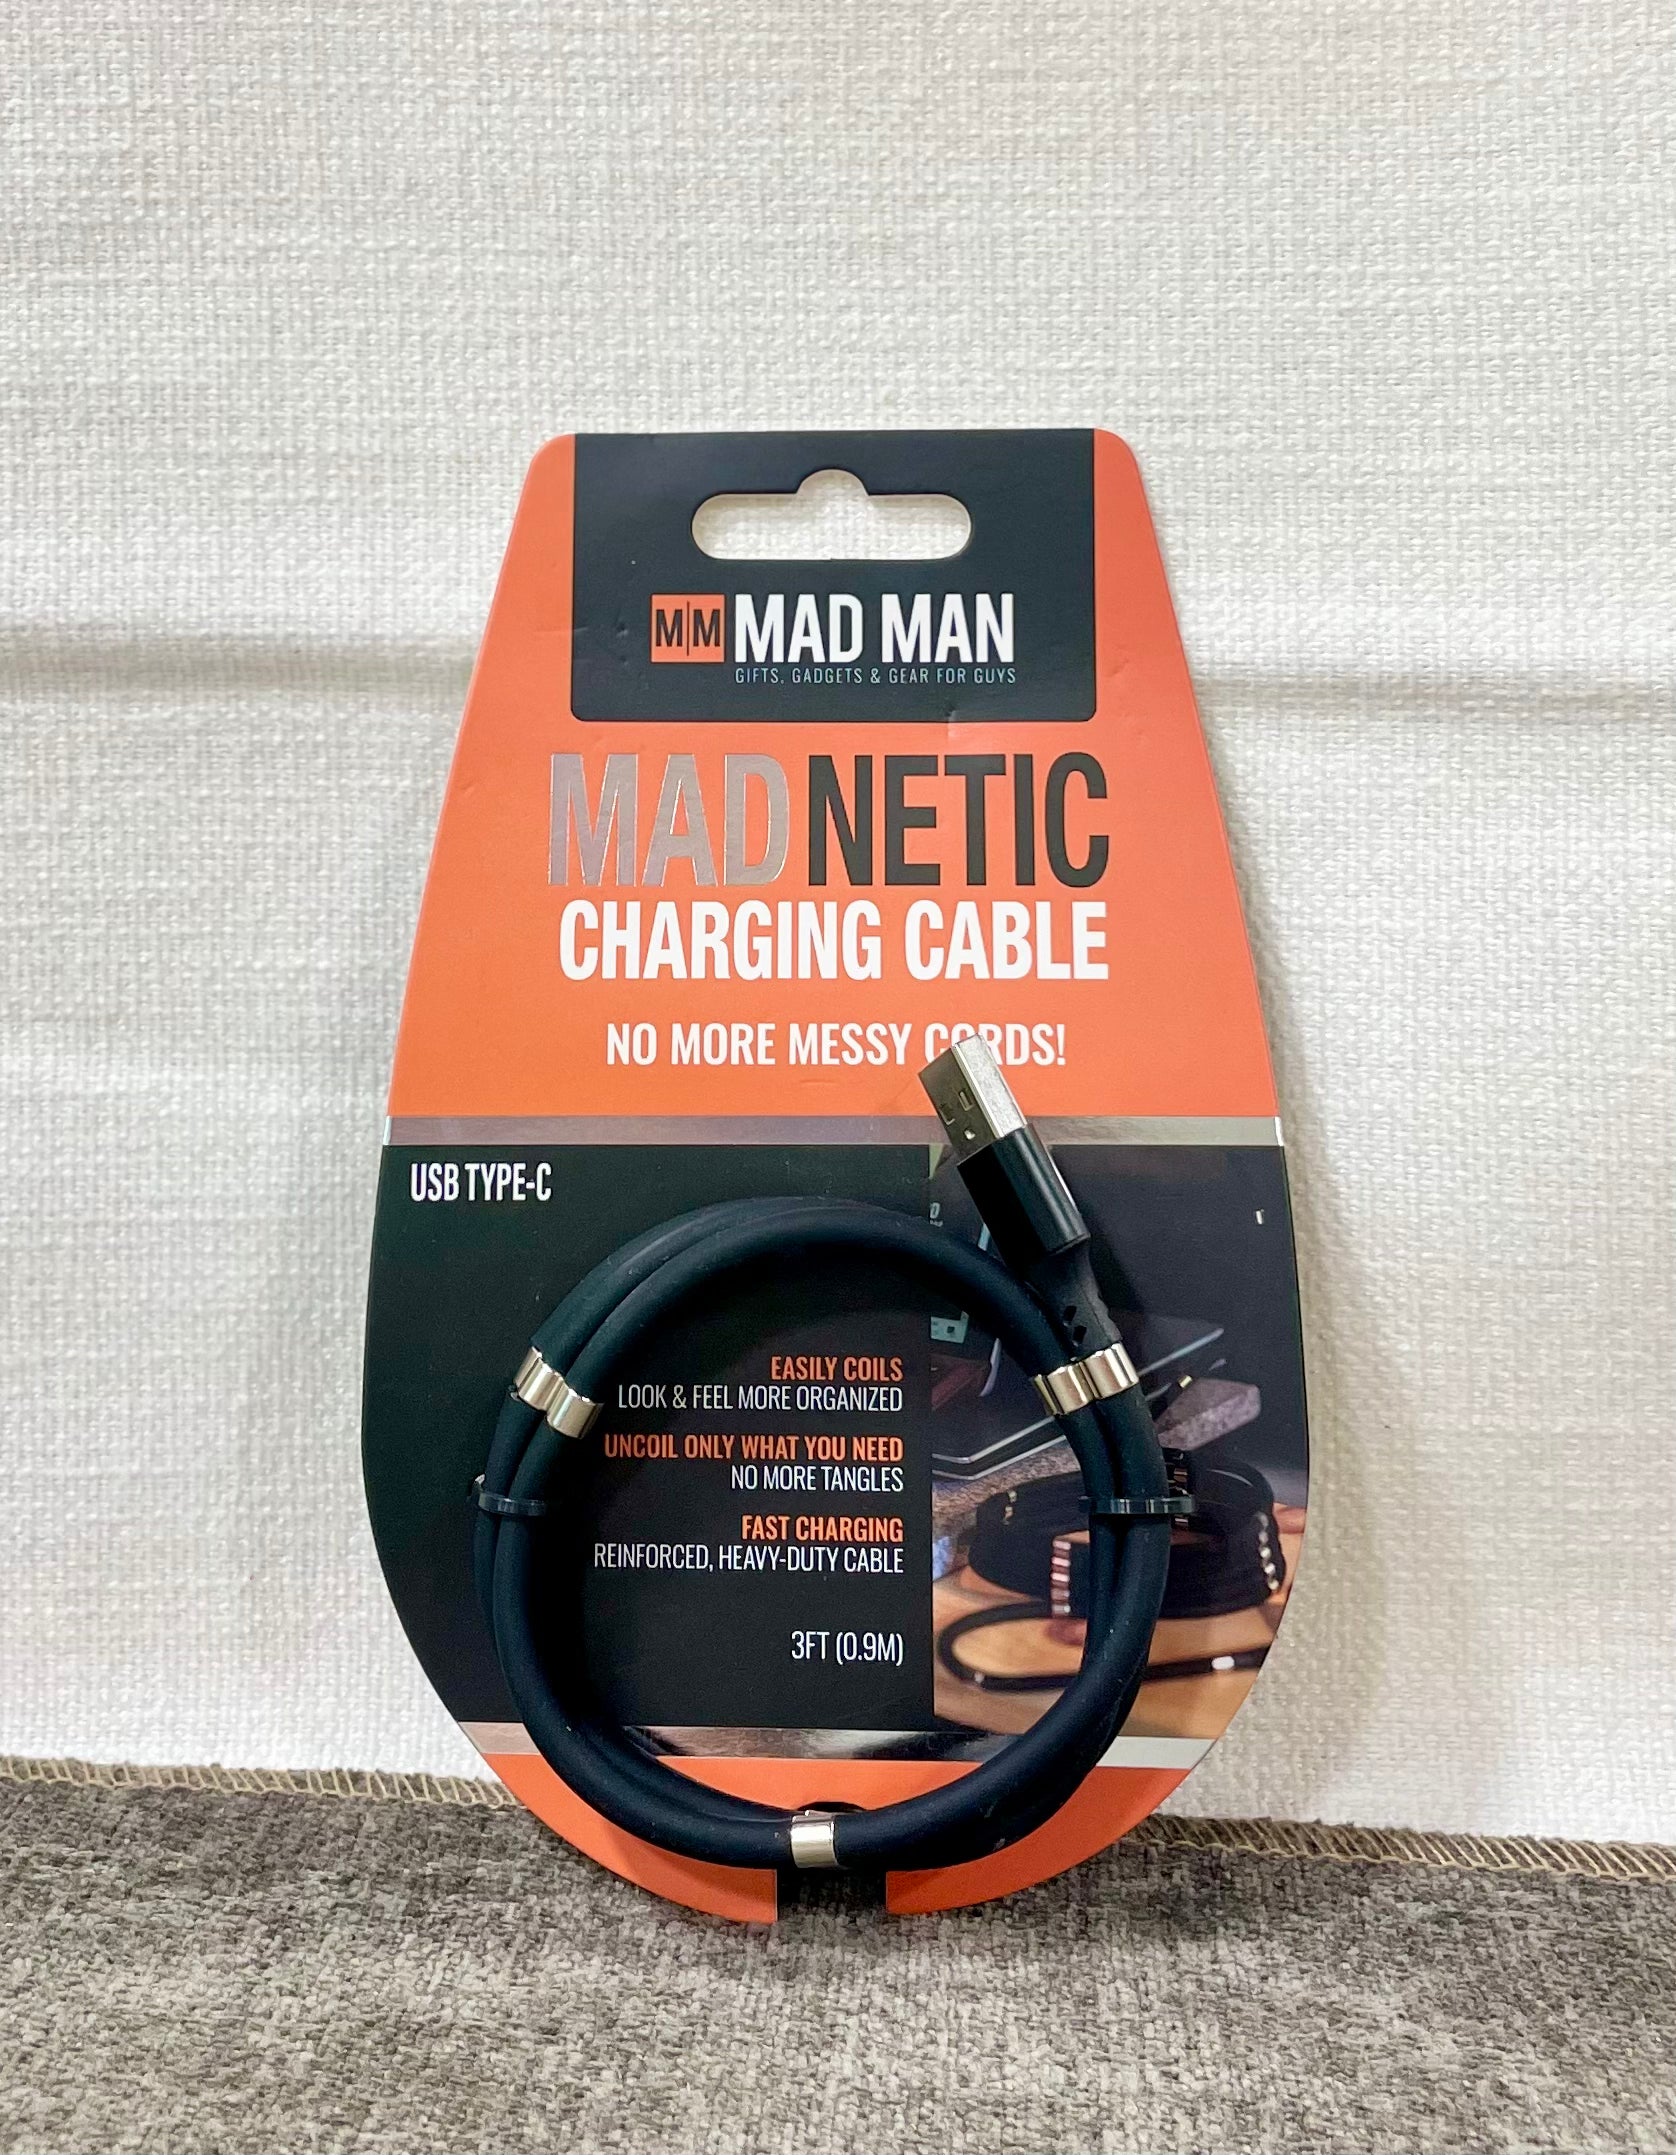 Magnetic 3ft charging cable